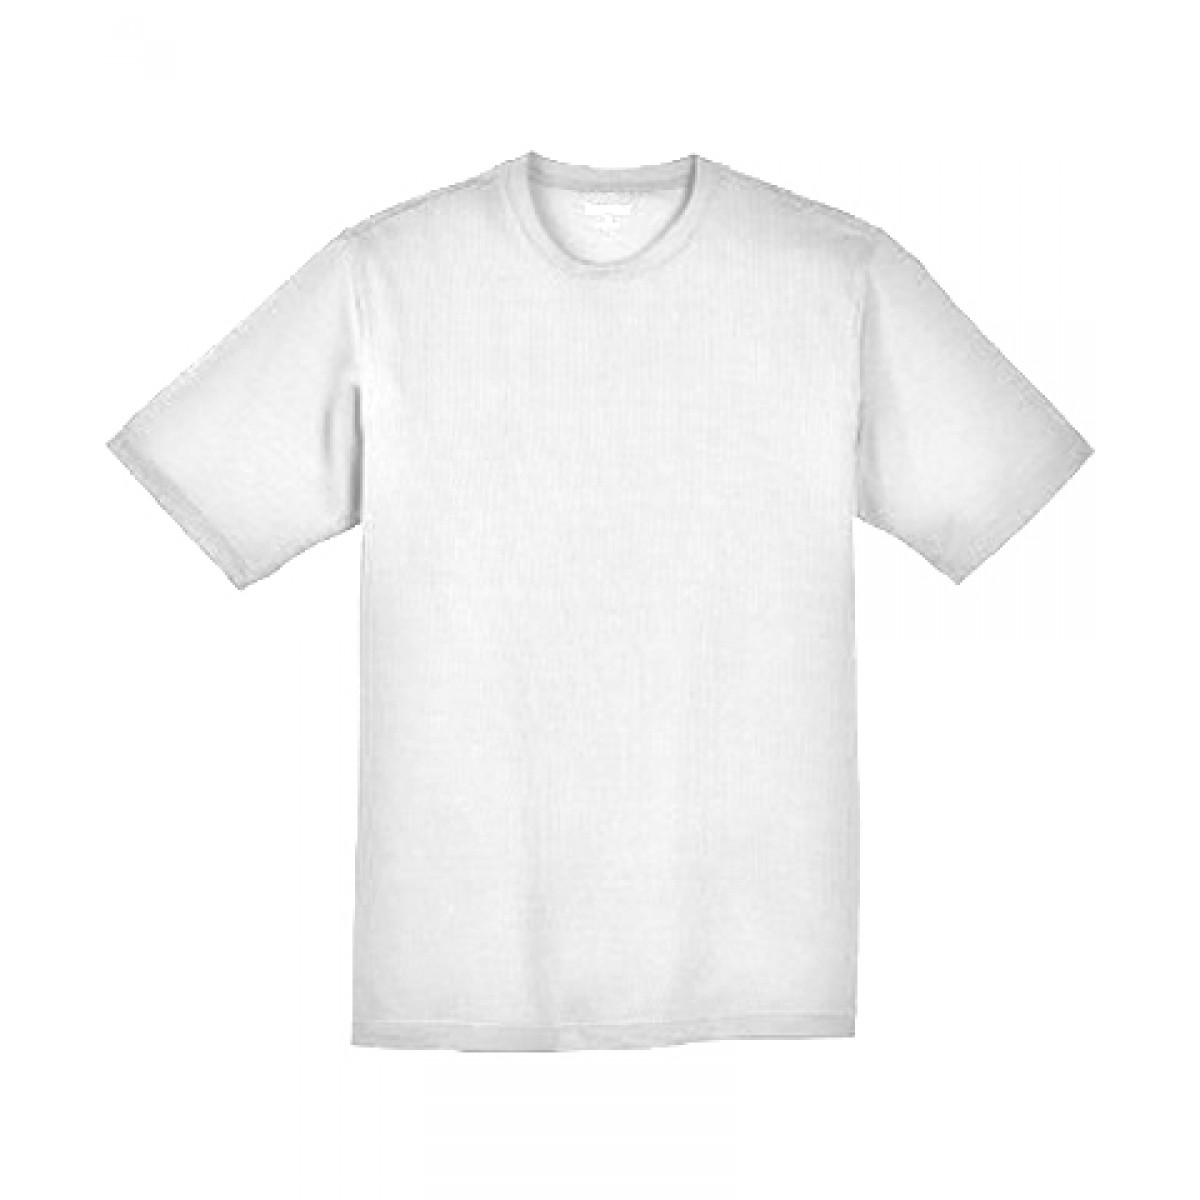 SS Dri-Fit Tees - Web Store Special!-White-2XL